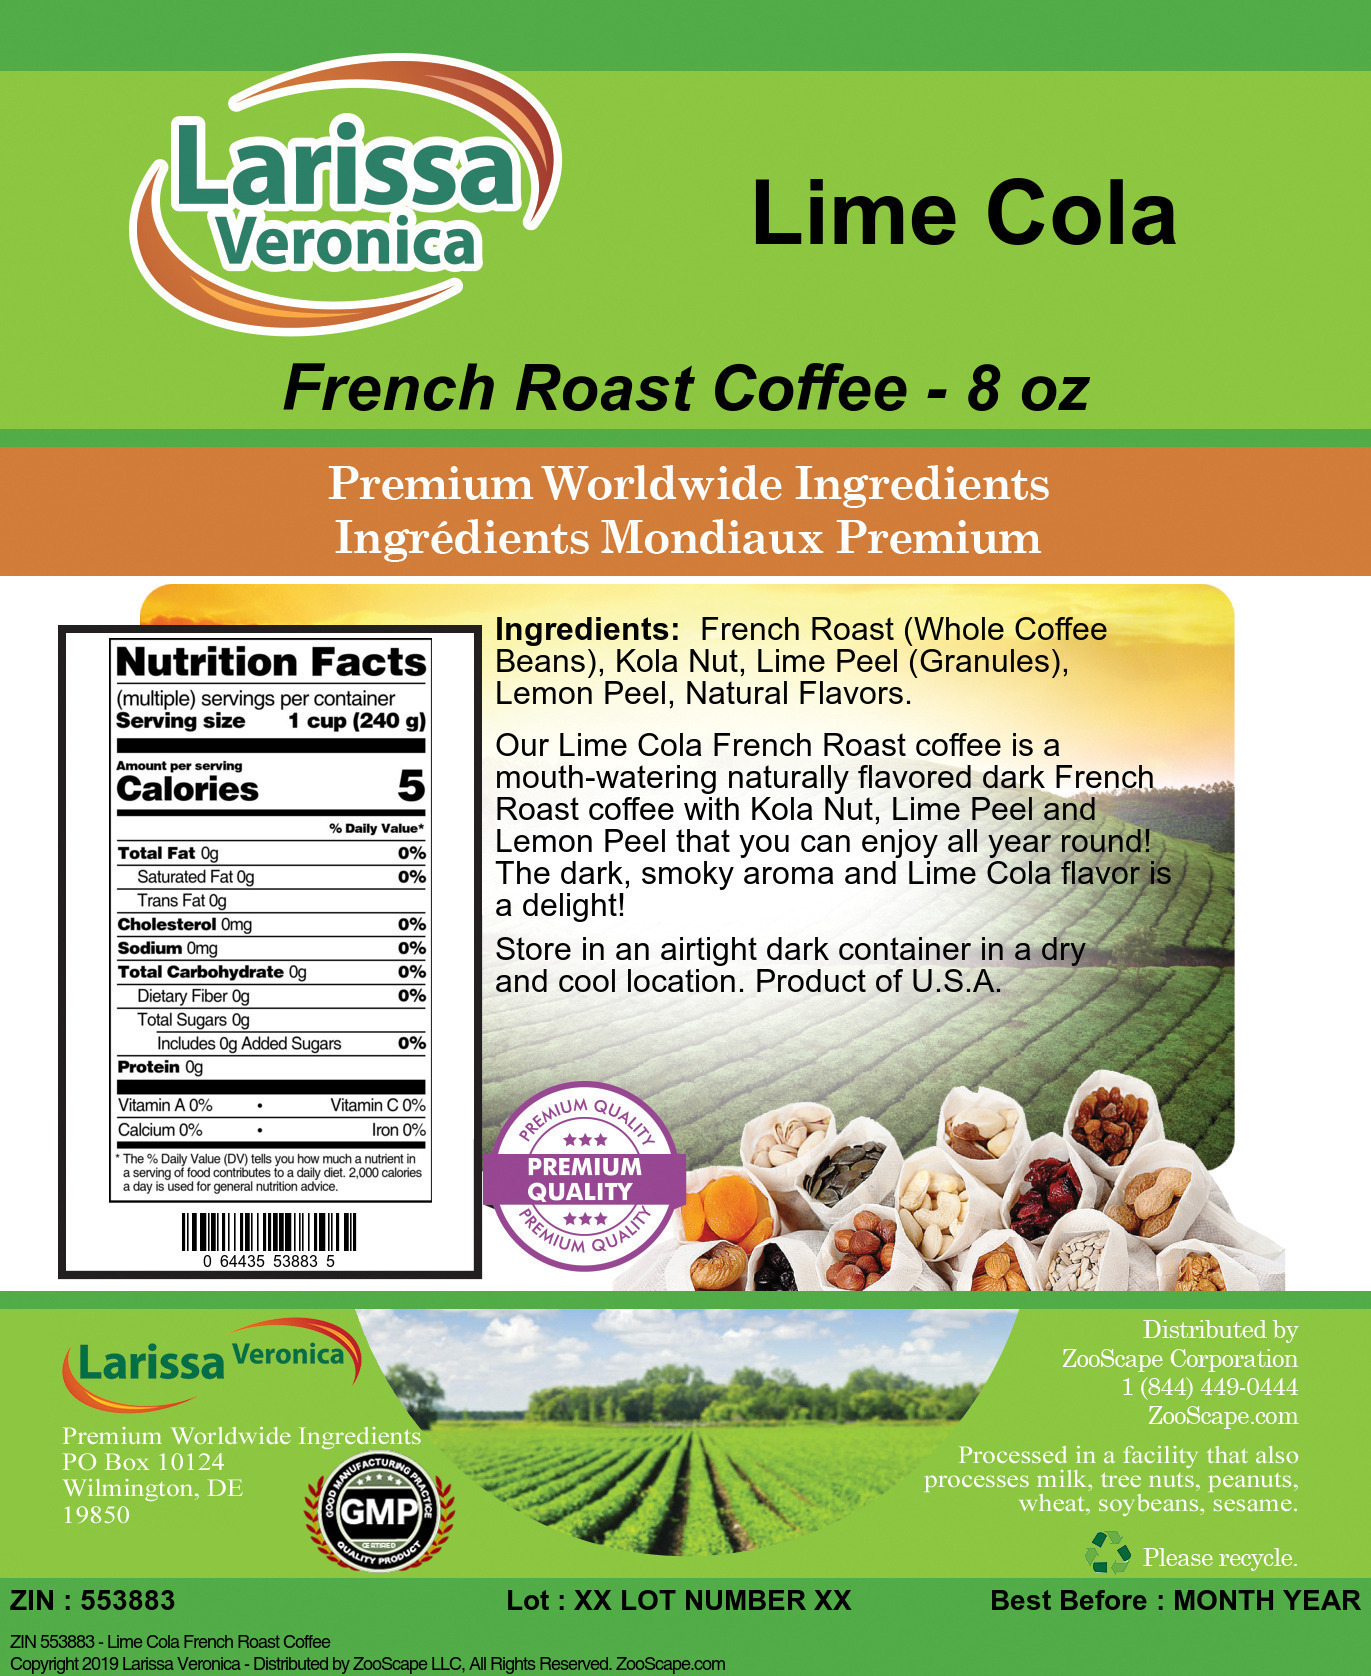 Lime Cola French Roast Coffee - Label